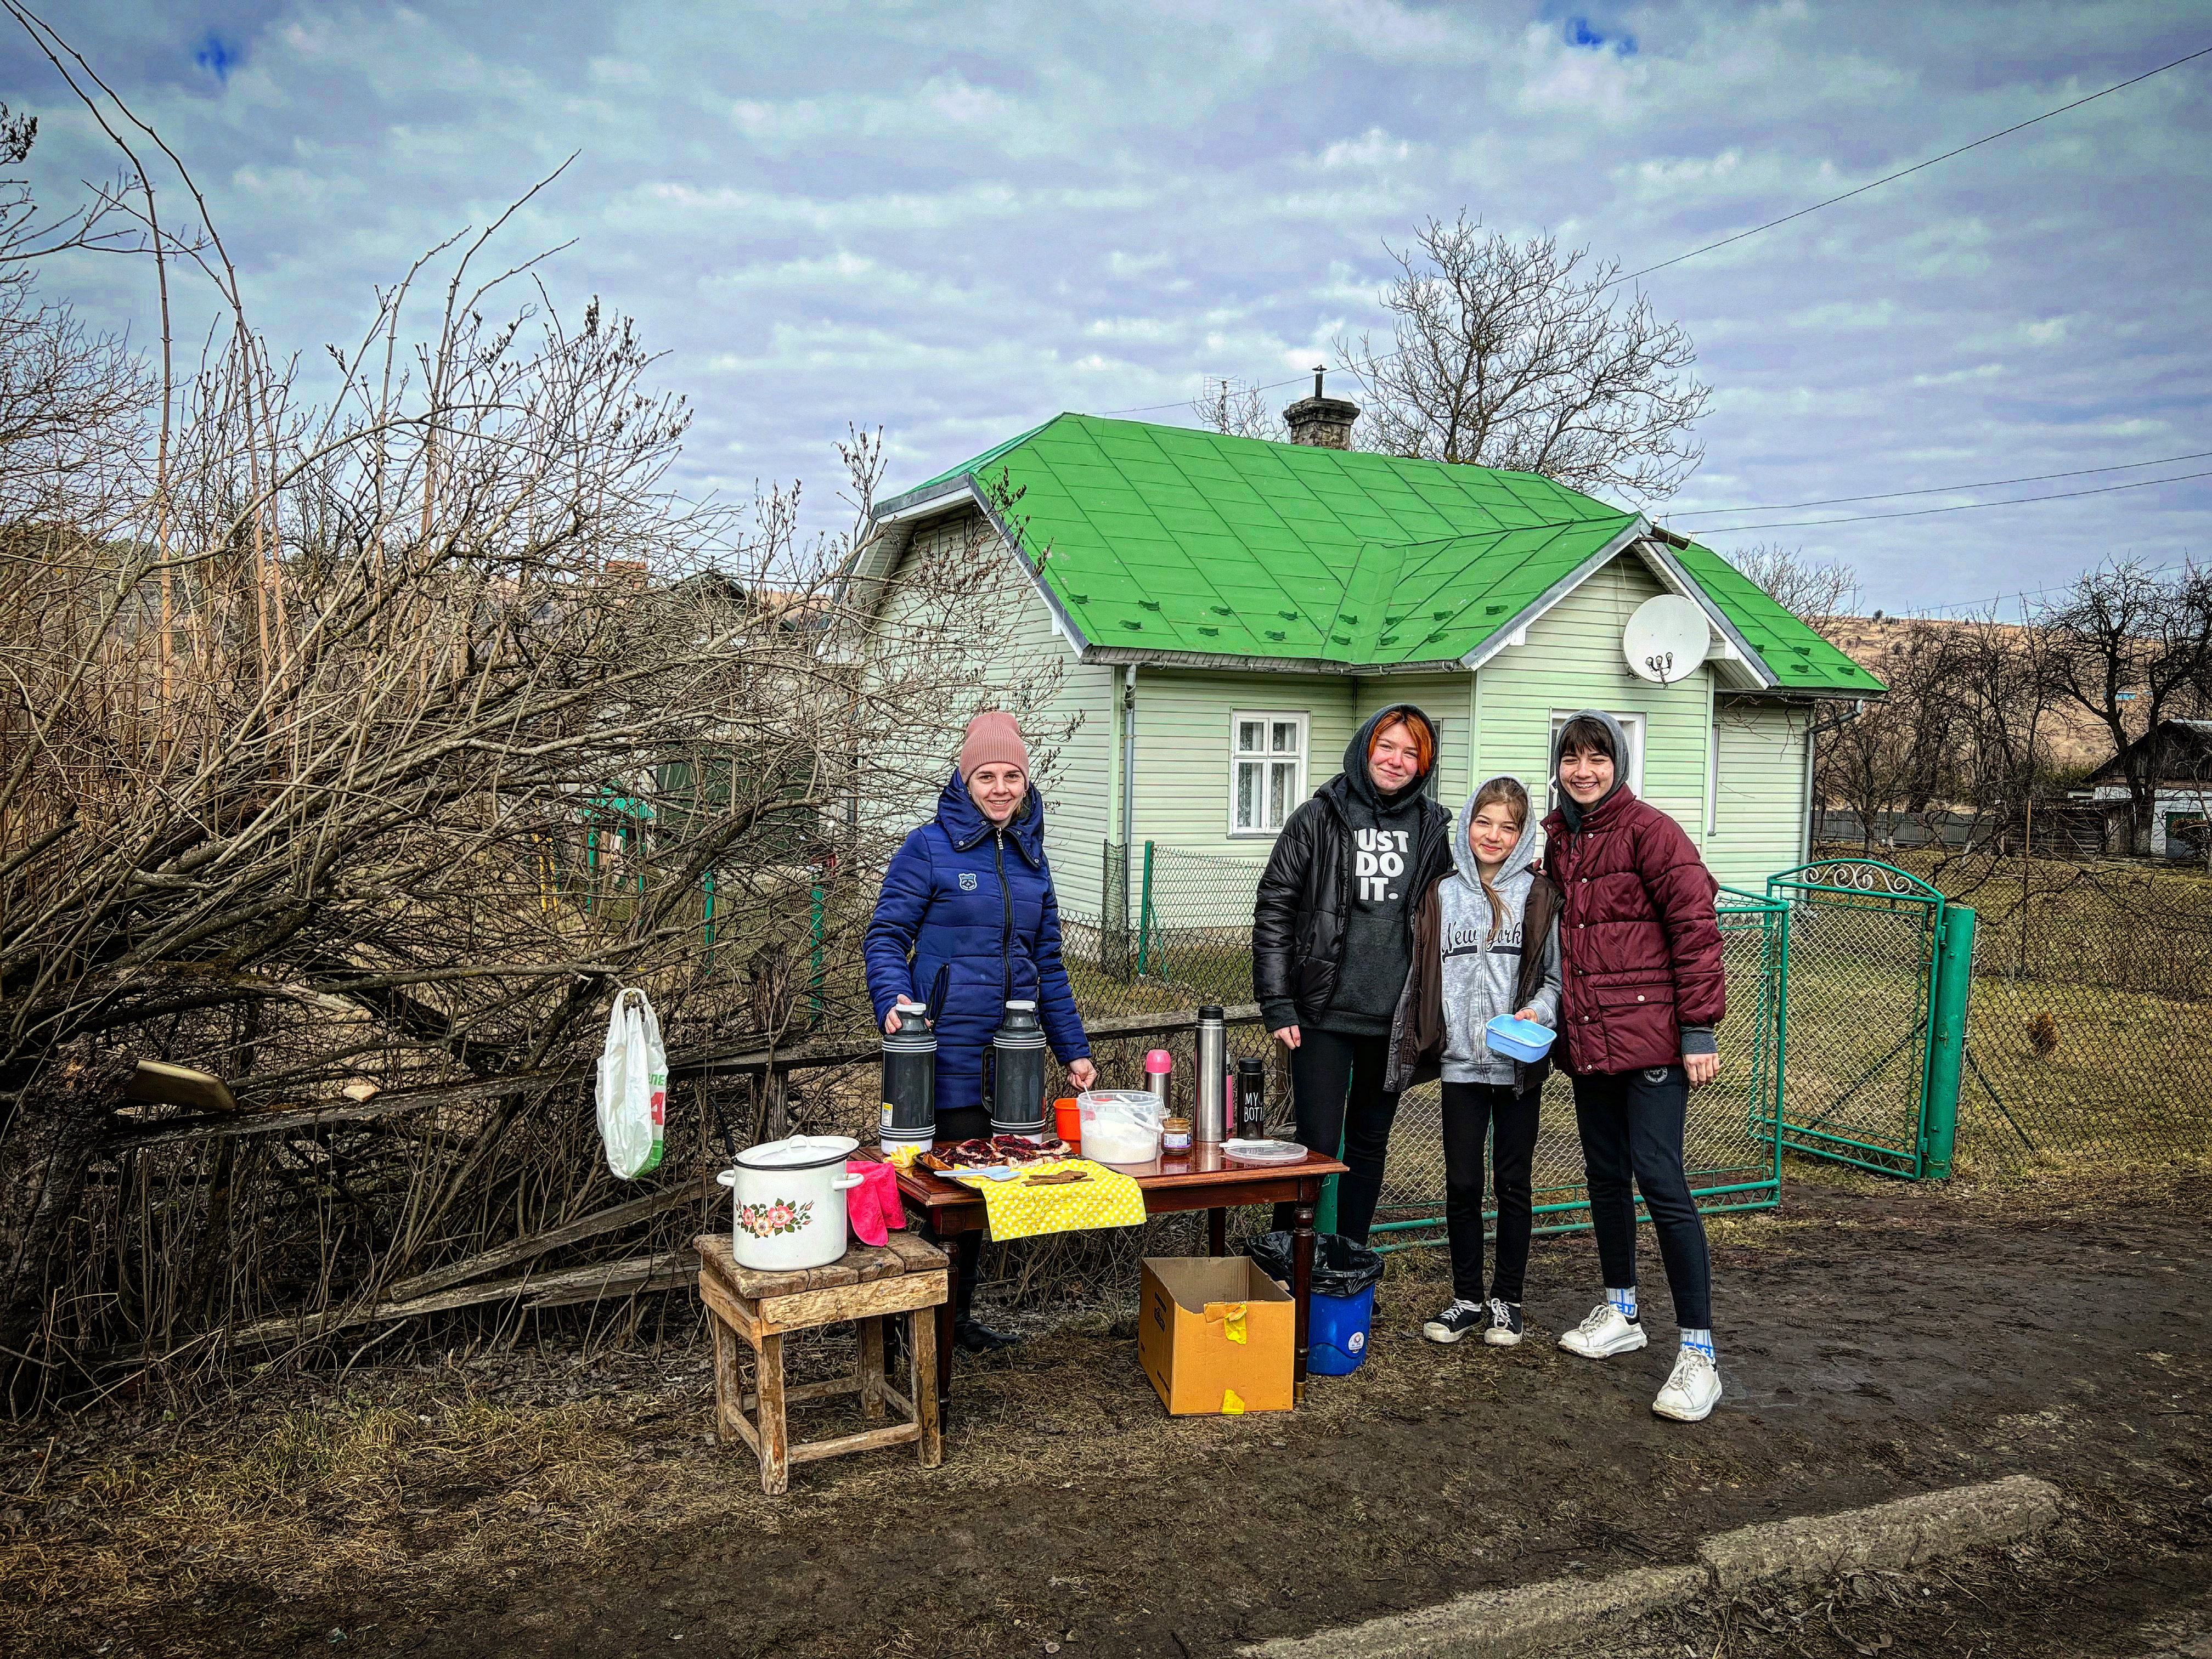 In the nation’s darkest hours, Ukrainians look out for each other